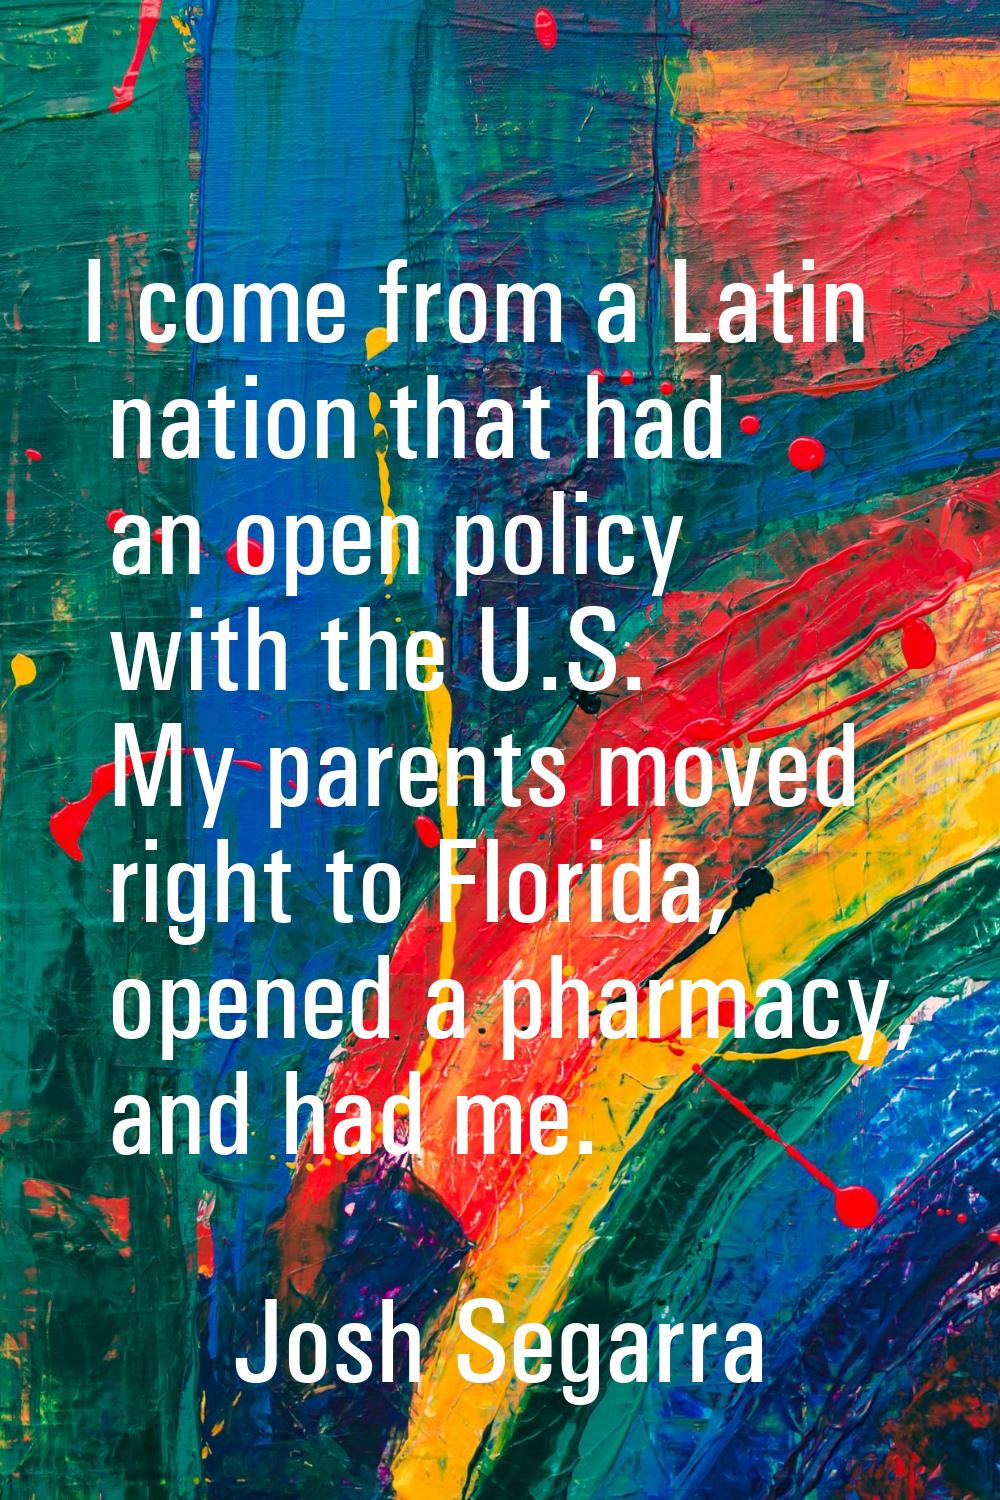 I come from a Latin nation that had an open policy with the U.S. My parents moved right to Florida,